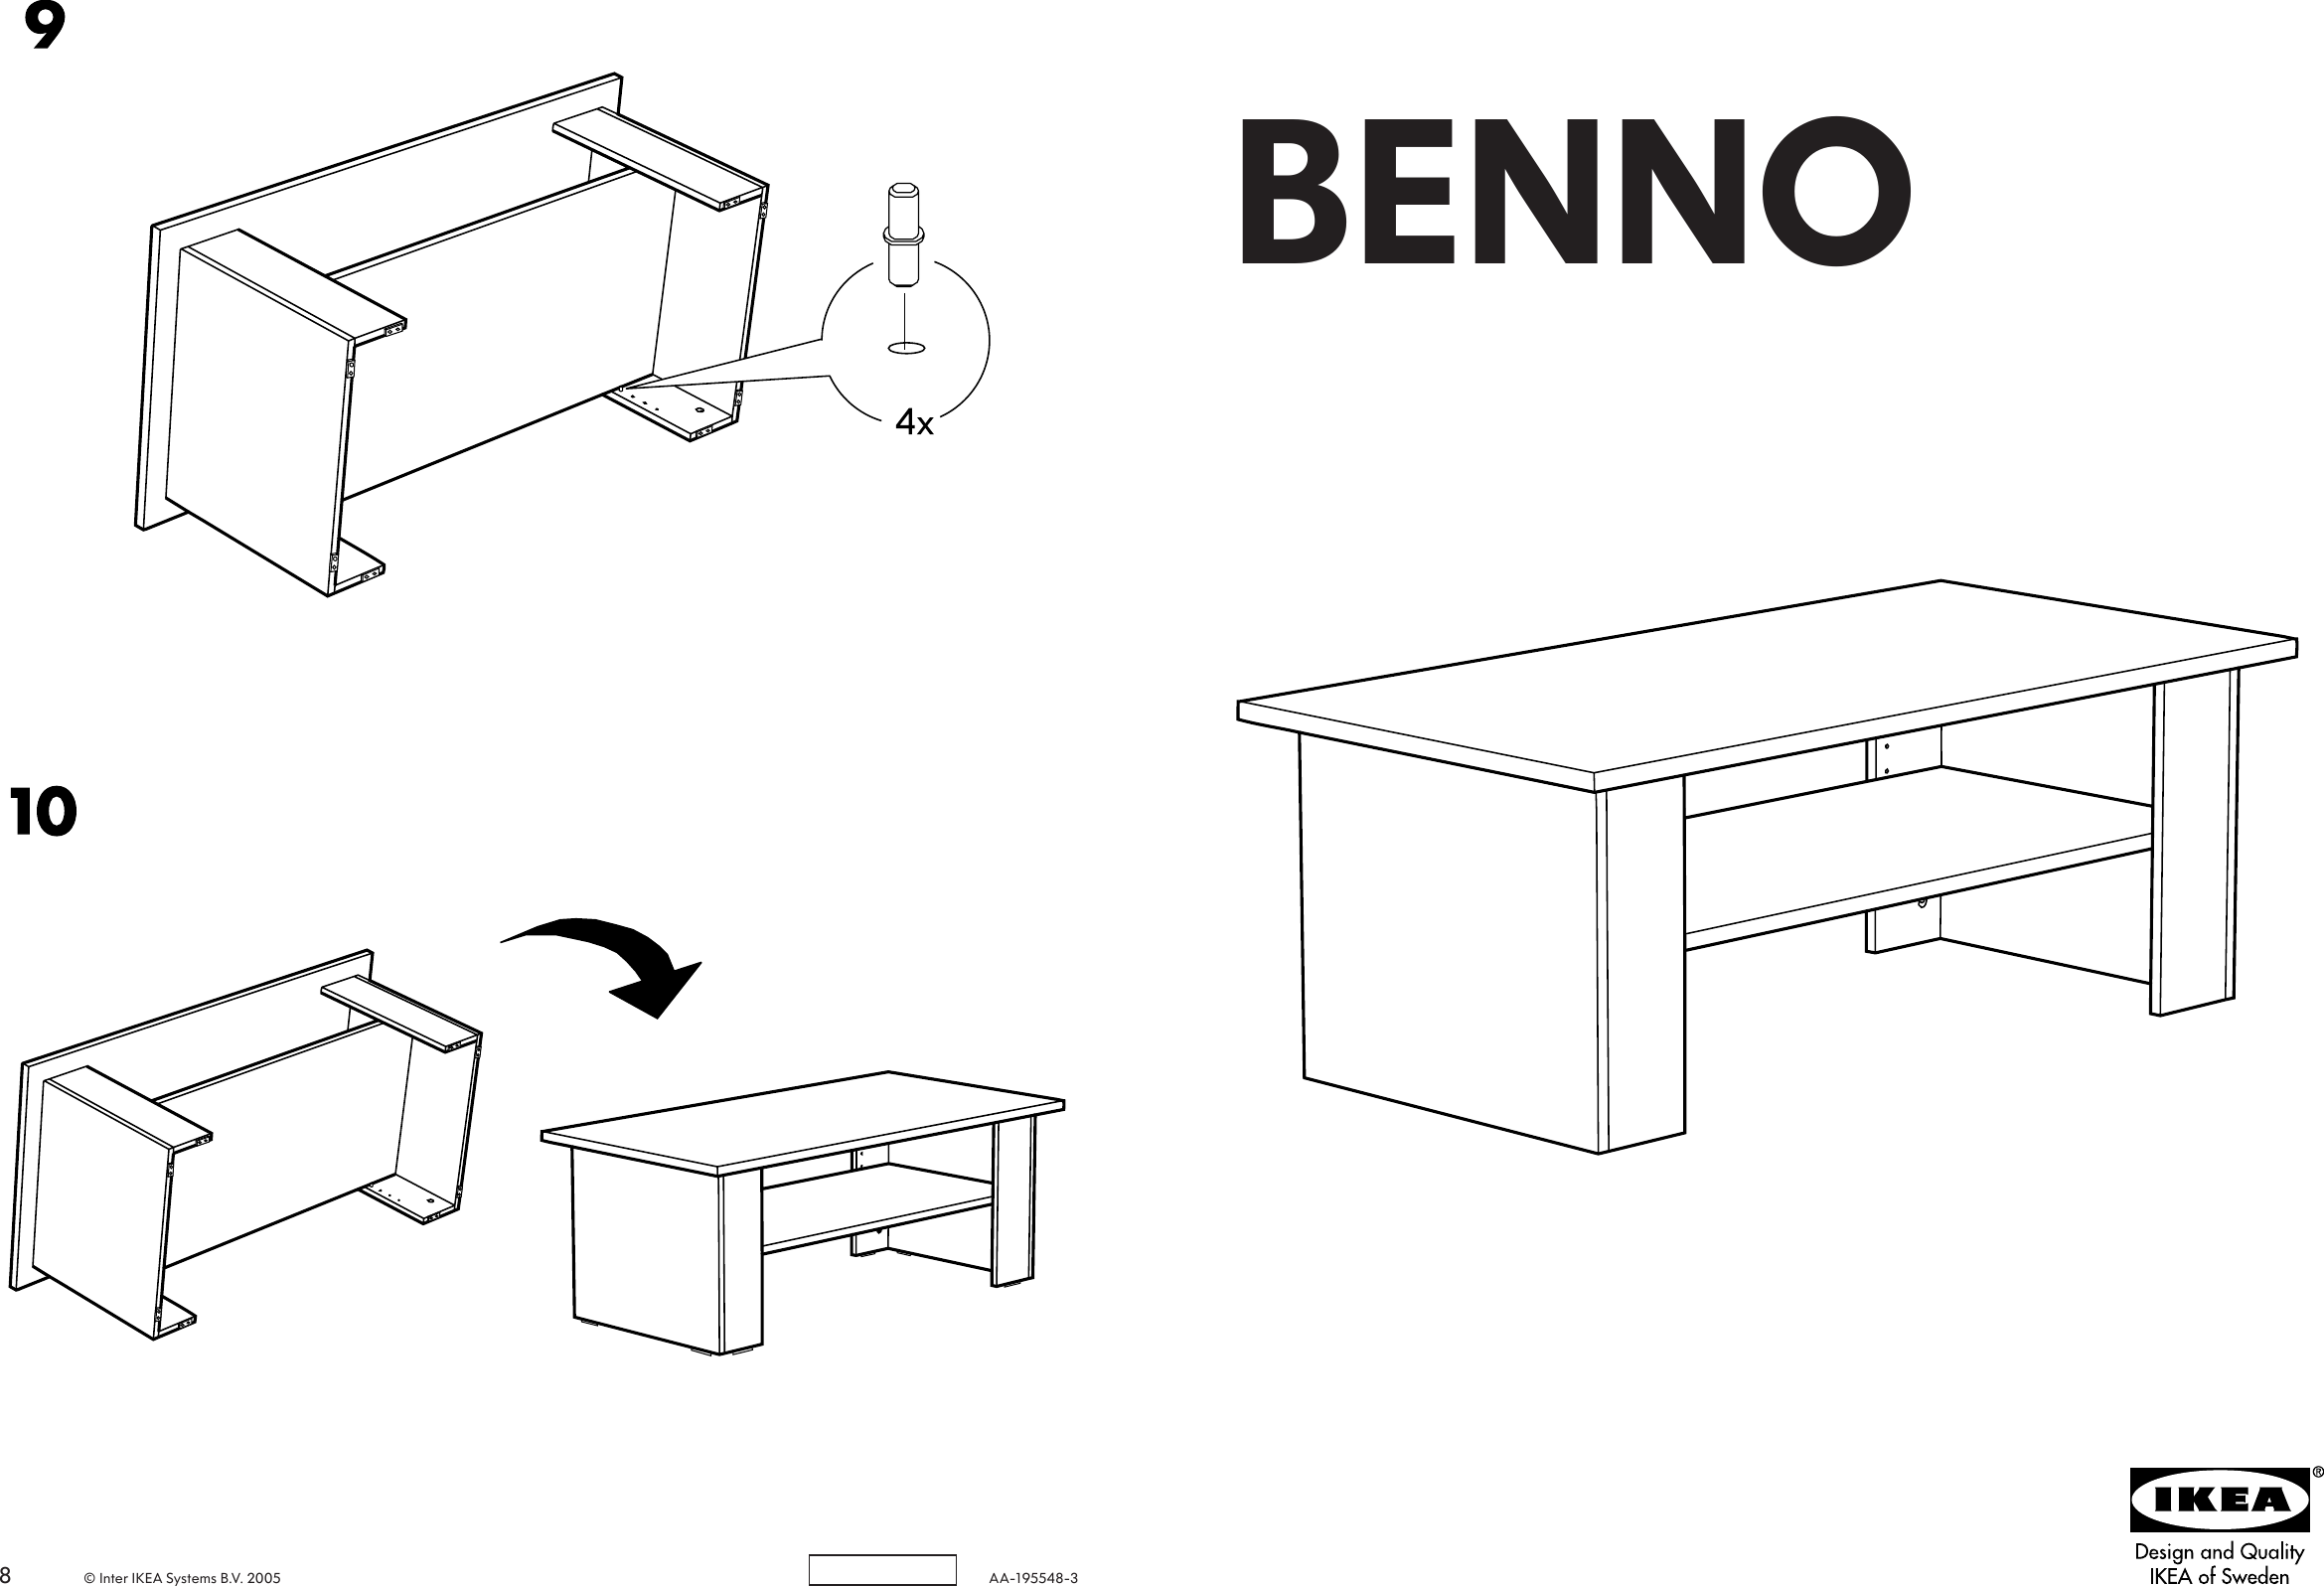 Ikea Benno Coffee Table 46 1 2x23 5 8 Assembly Instruction